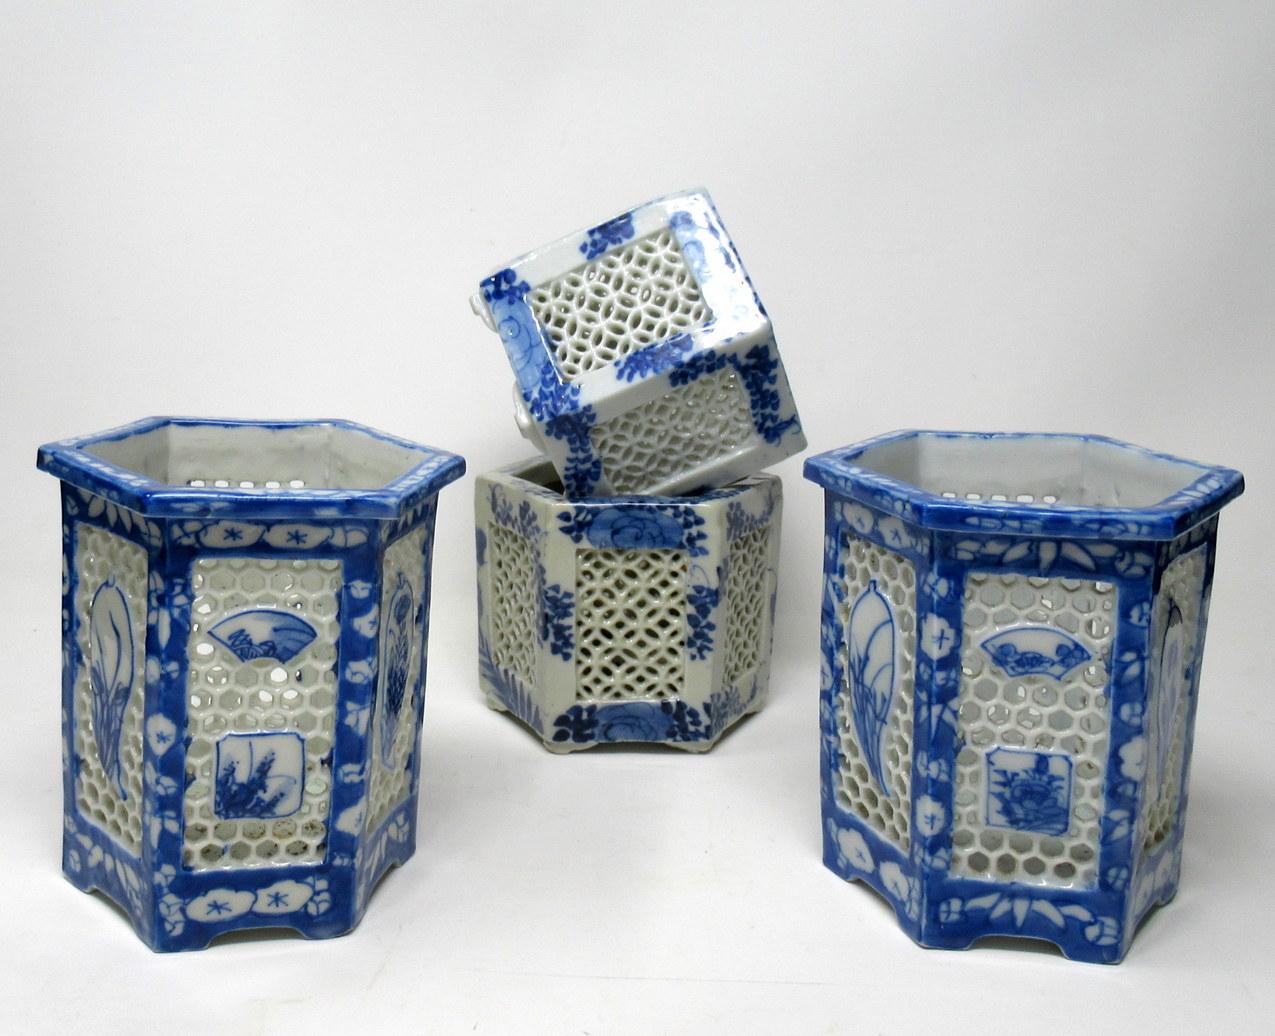 Stylish set of four hand painted Japanese or Chinese export reticulated pierced blue and white porcelain vases of hexagonal outline. circa first half of the 20th century. 

Each finely hand decorated on all outer panels depicting flowers and